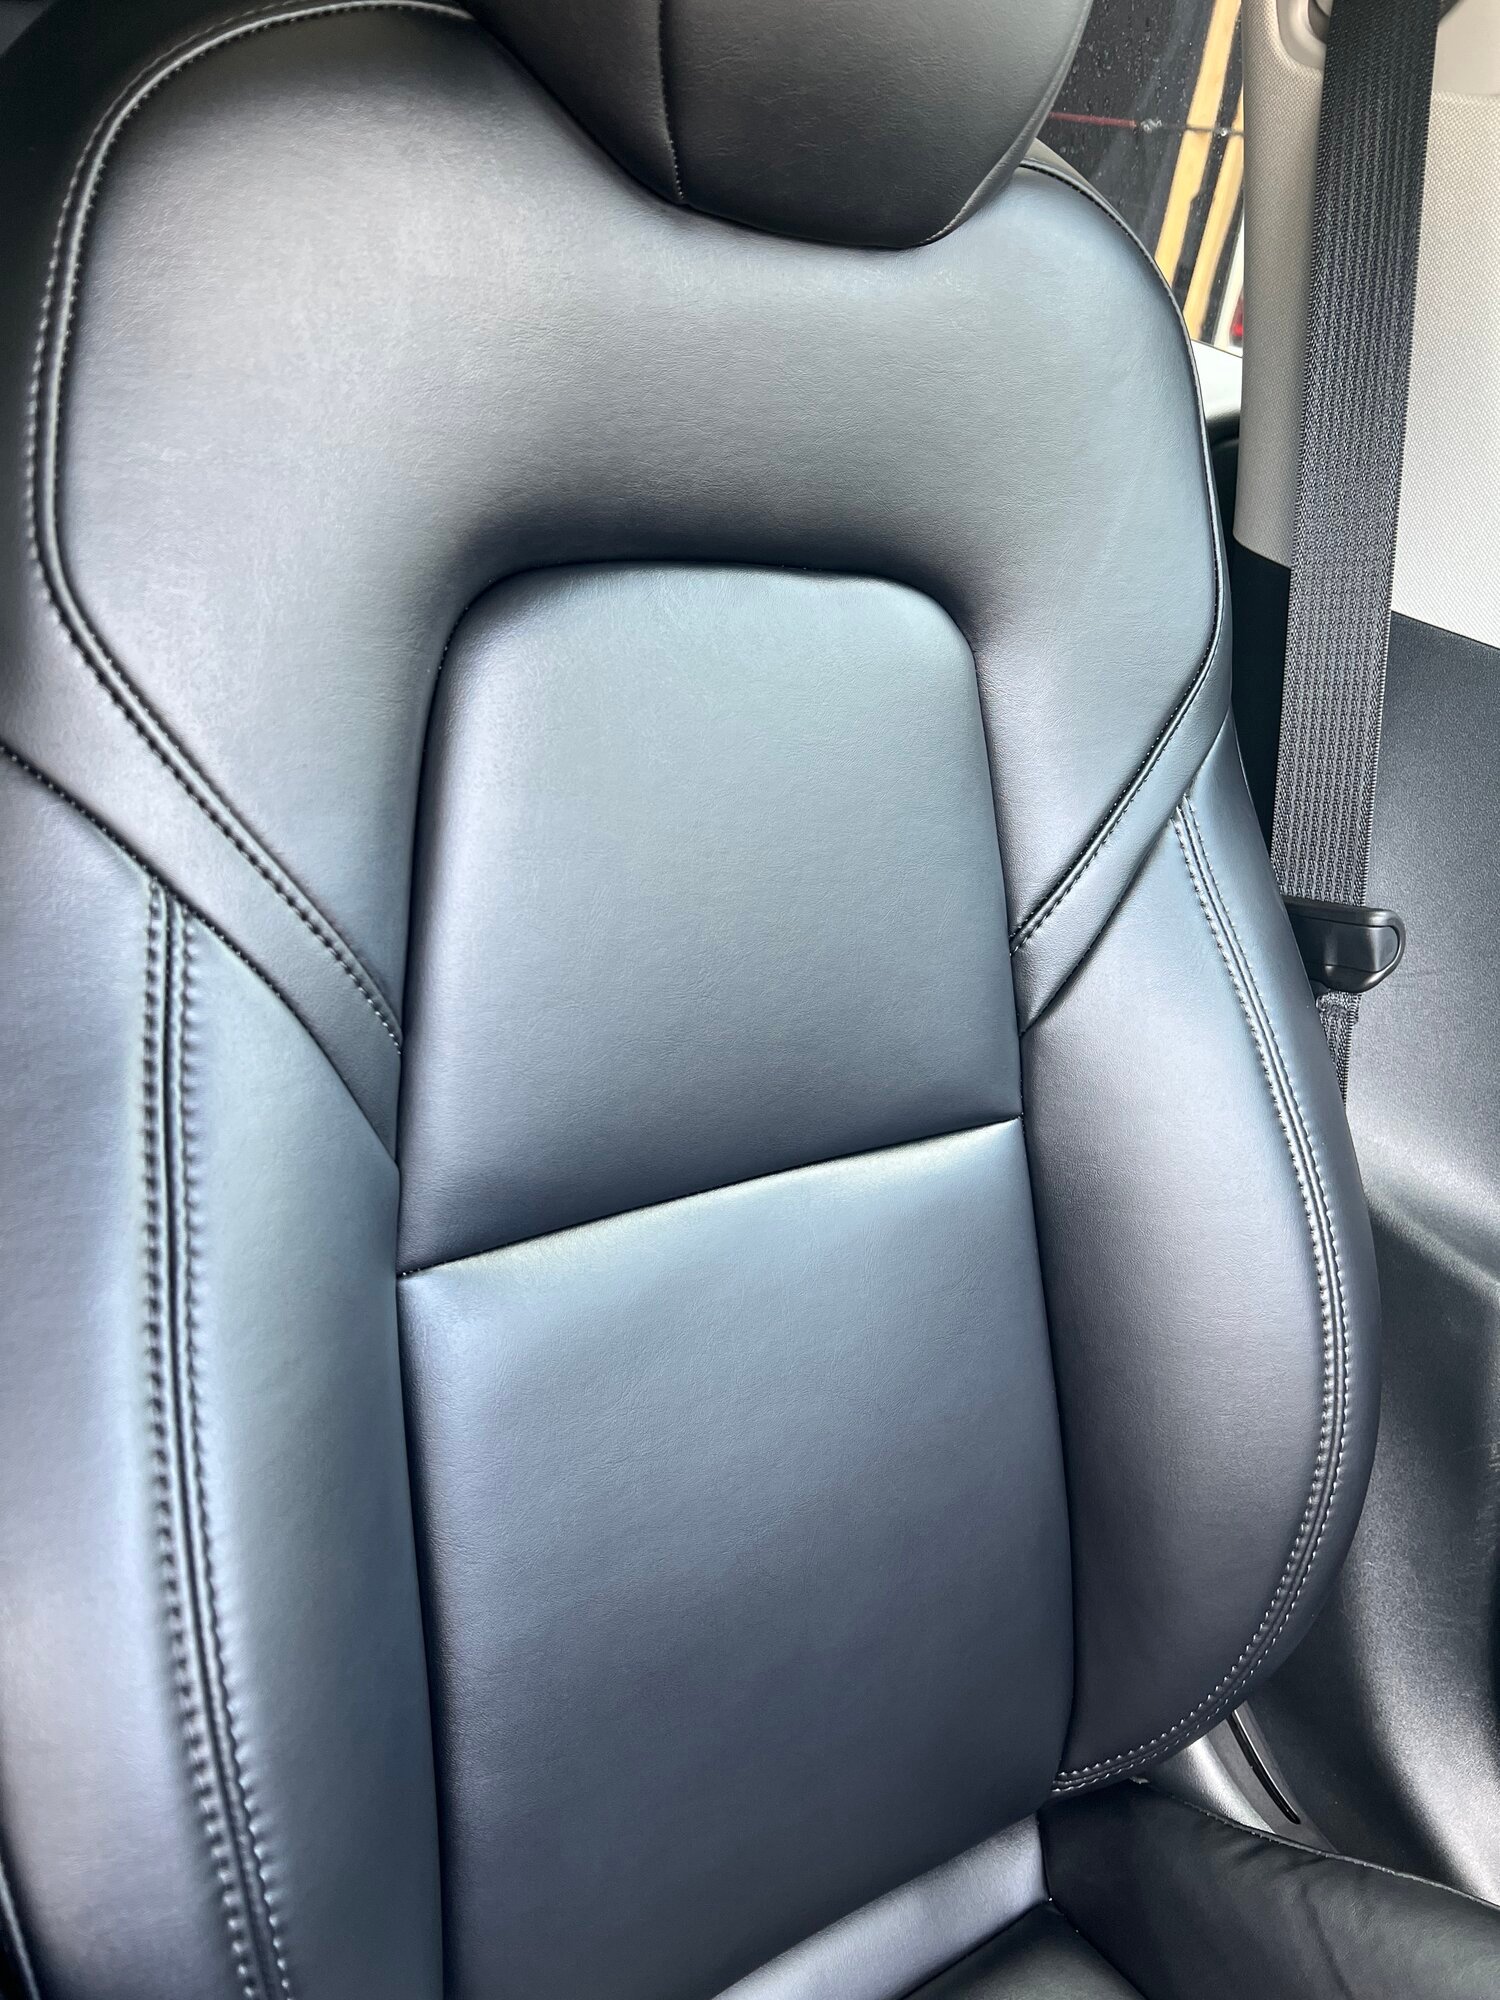 Car INTERIOR Cleaning Professional TREATMENT Leather Seats and Plastics of  your Tesla